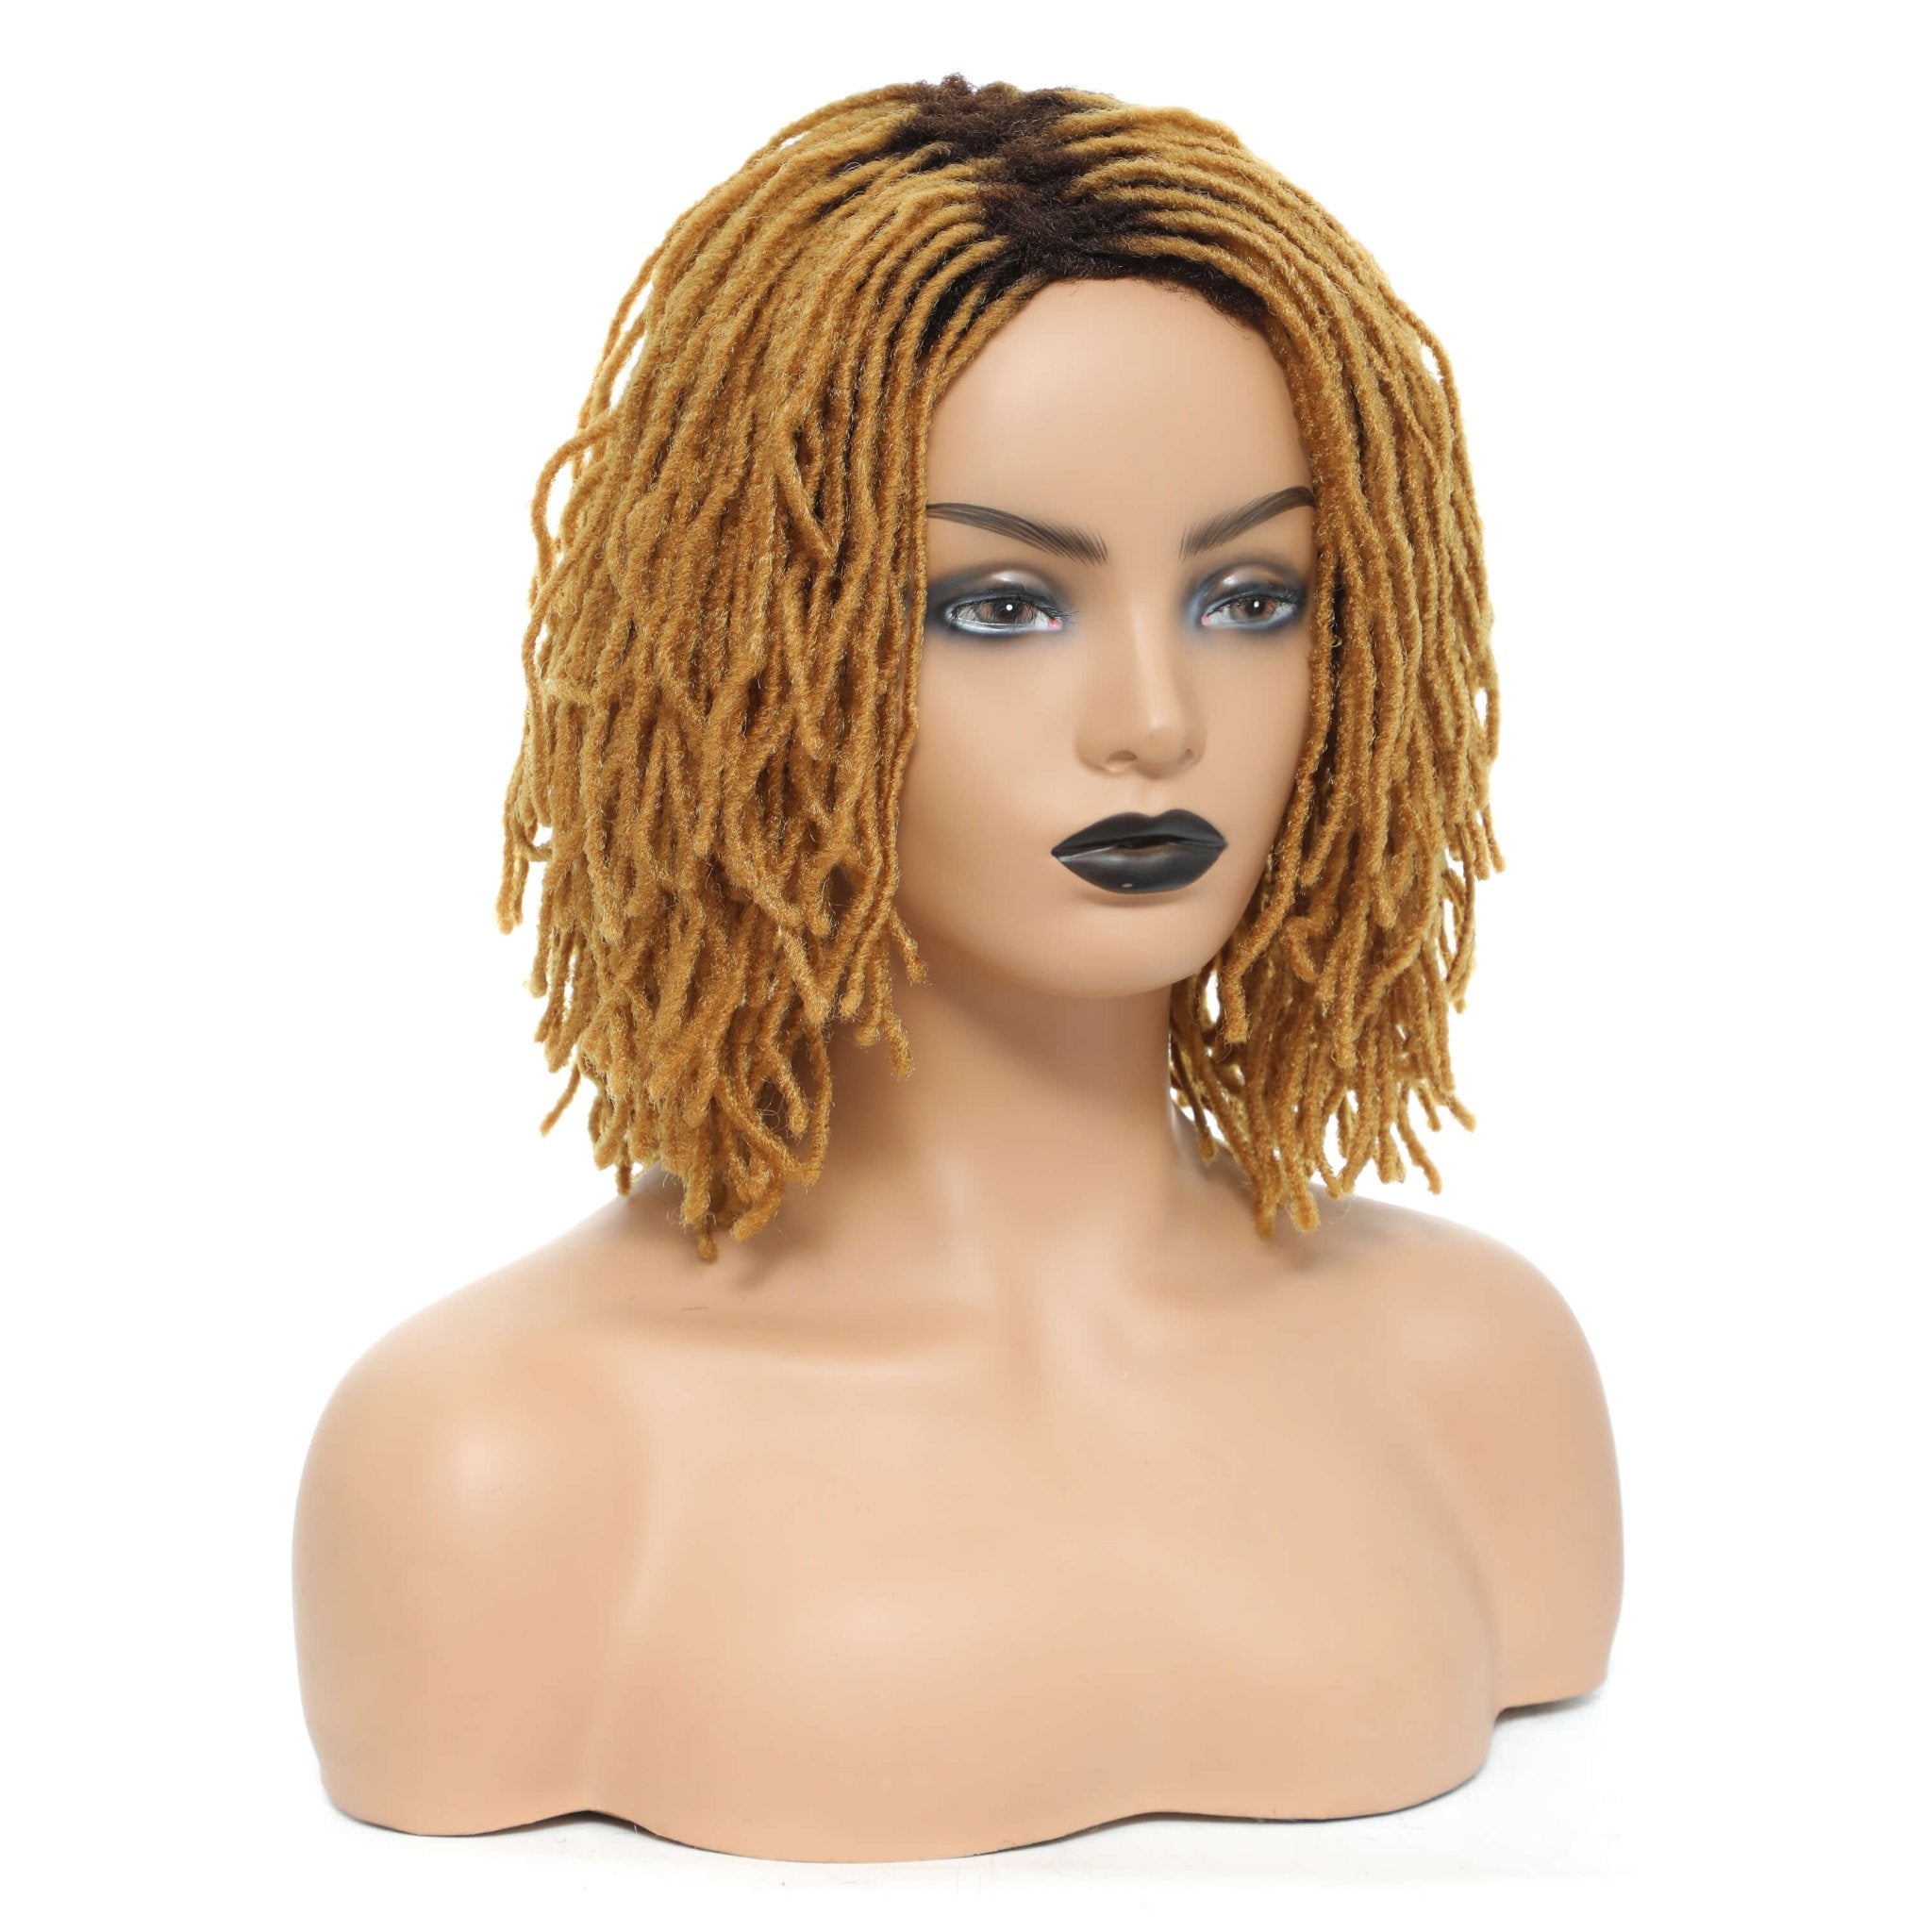 10" Braided Wigs Afro Bob Wig Synthetic Dreadlock Wigs Short Curly - Flexi Africa - Flexi Africa offers Free Delivery Worldwide - Vibrant African traditional clothing showcasing bold prints and intricate designs